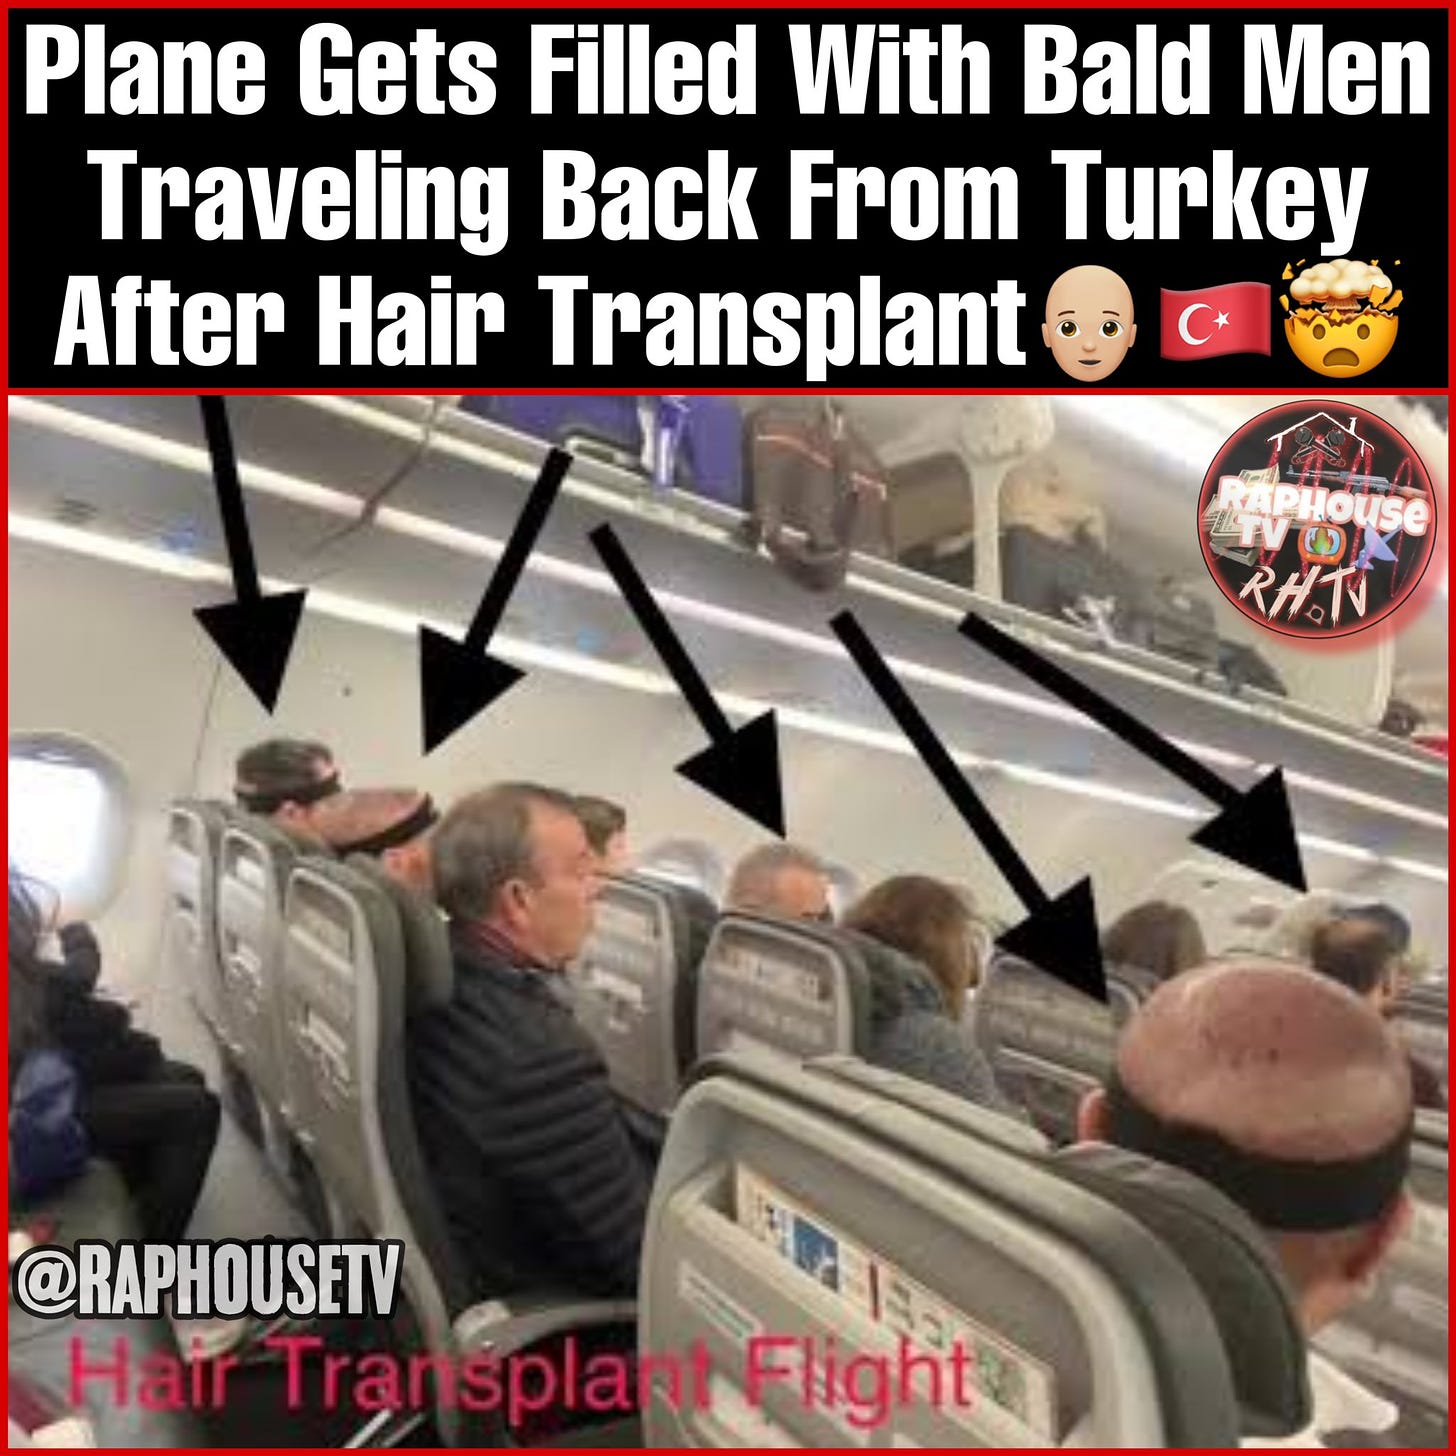 Raphousetv (RHTV) on X: "Plane Gets Filled With Bald Men Traveling Back  From Turkey After Hair Transplant🧑🏼‍🦲🇹🇷🤯 https://t.co/d8FIXSyln3" / X